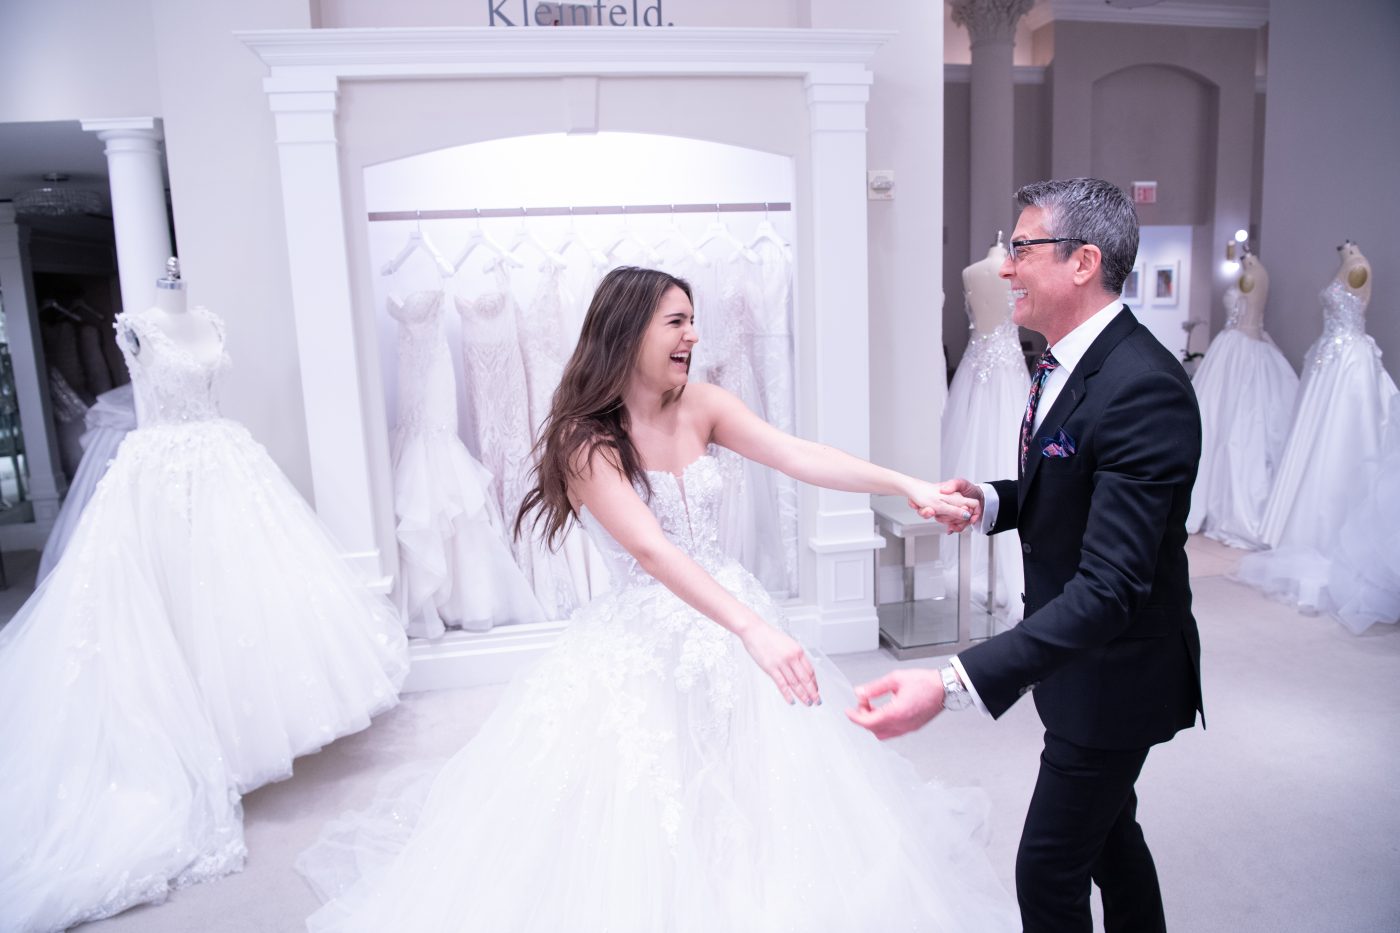 I Tried on Wedding Dresses at Kleinfeld From 'Say Yes to the Dress